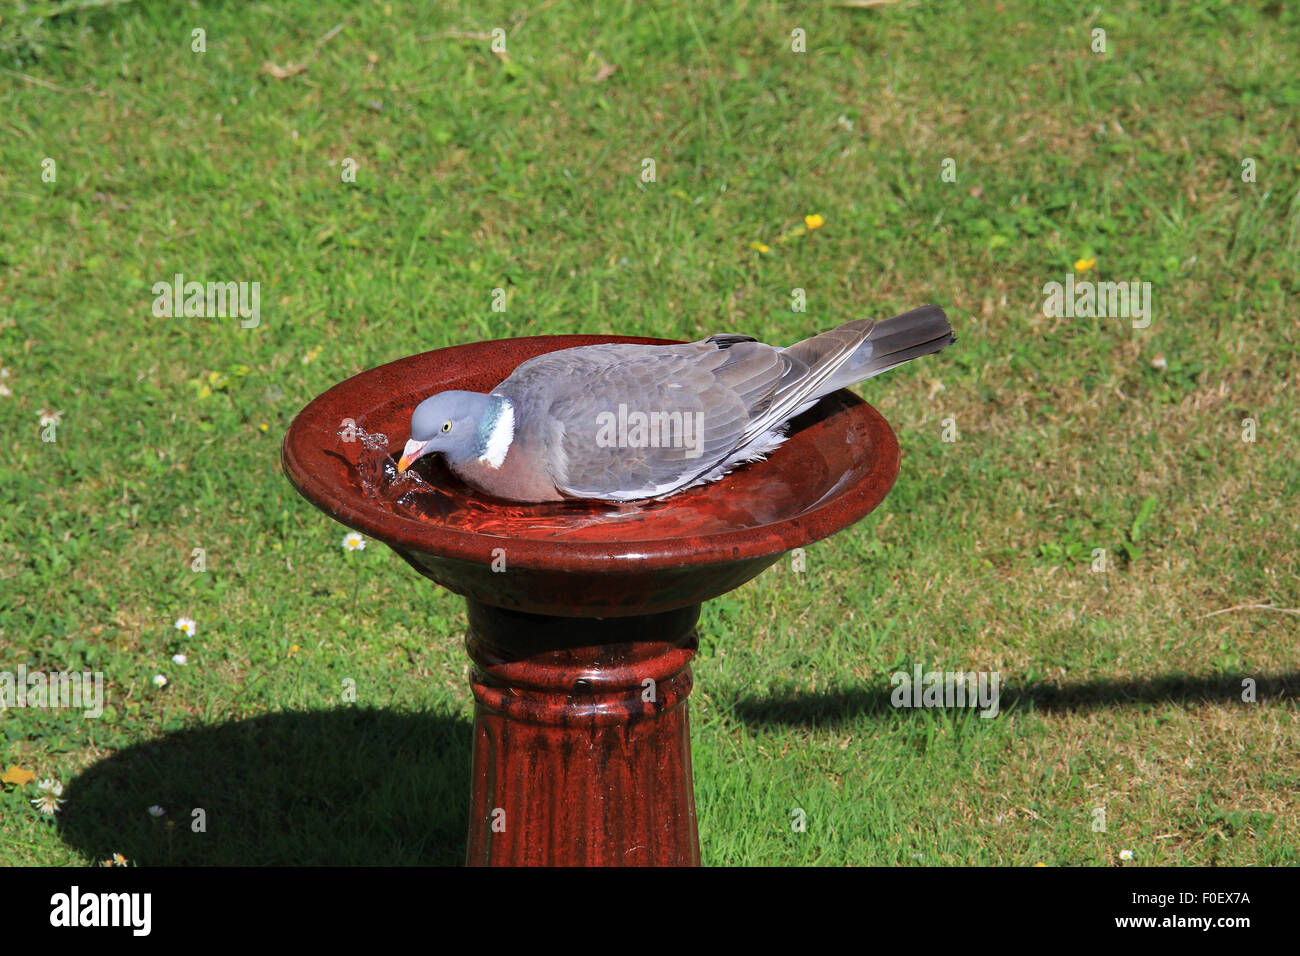 A PIGEON MAKING USE OF A BIRD BATH IN A BRITISH GARDEN Stock Photo